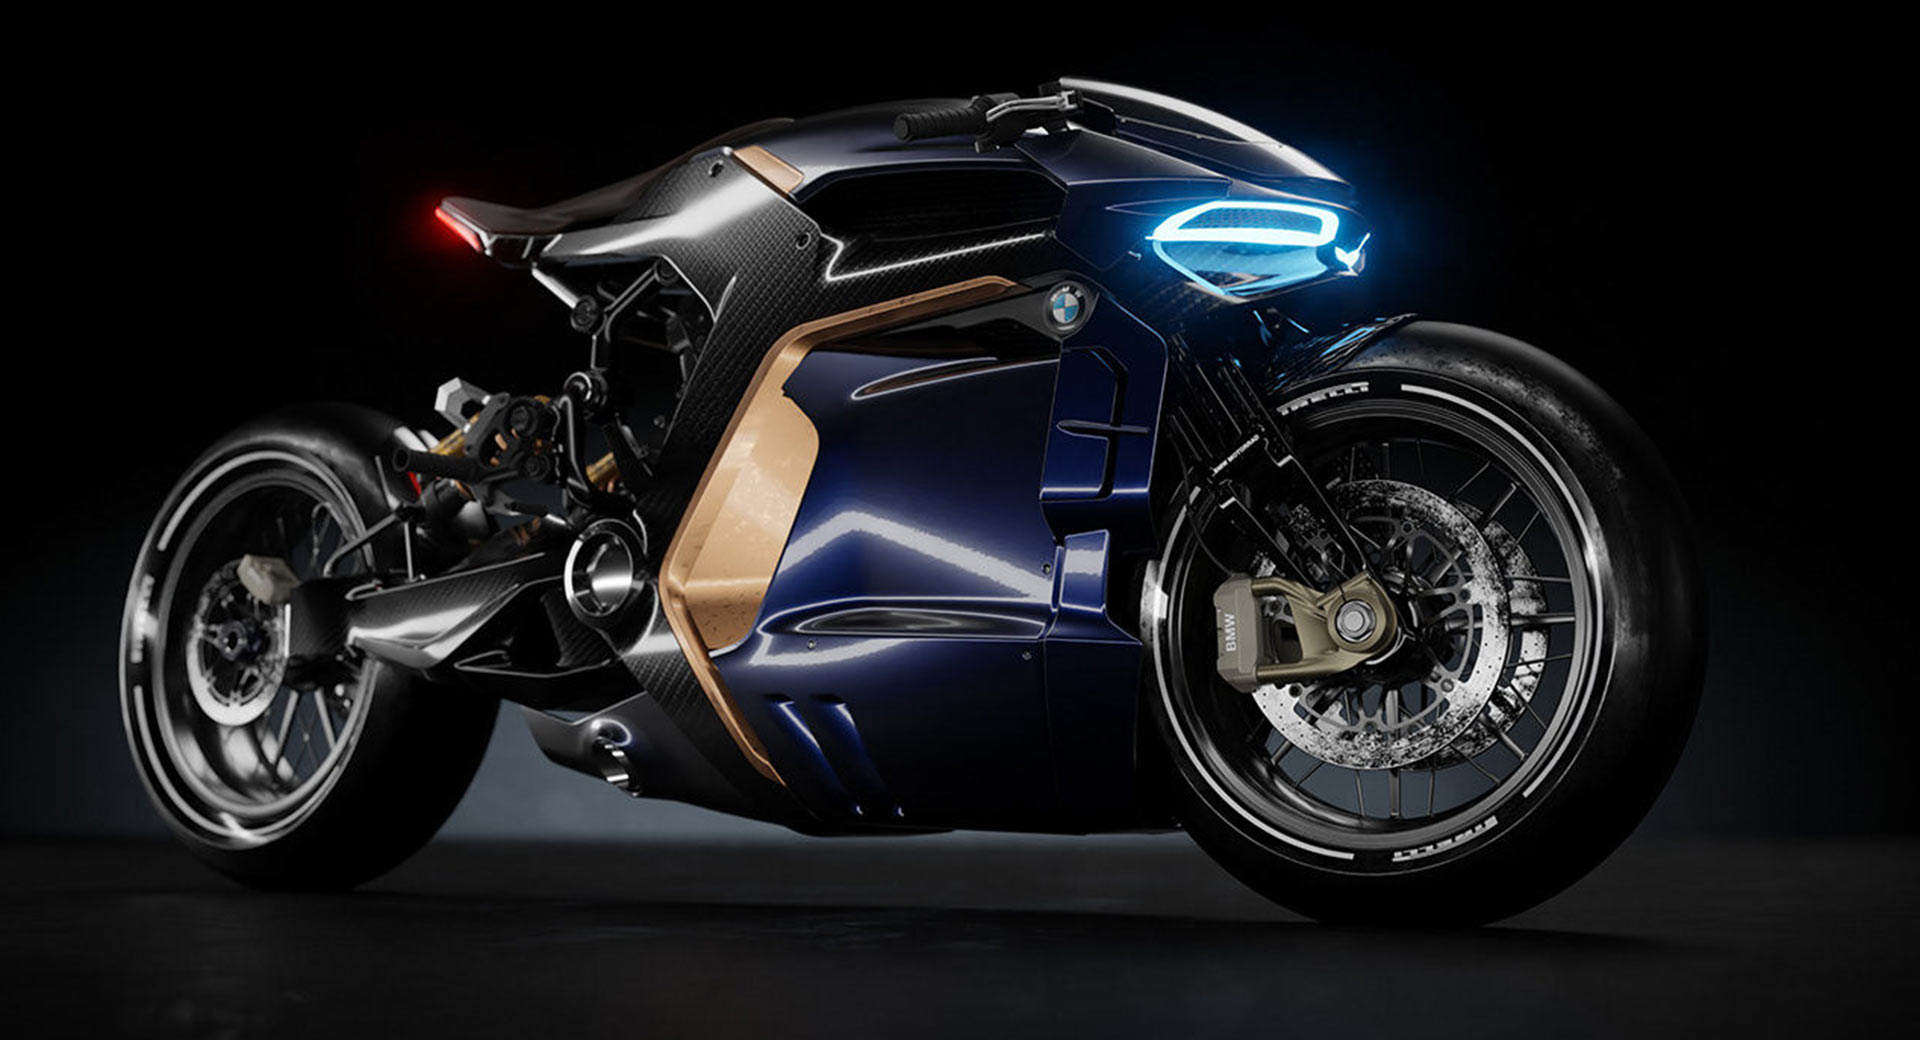 BMW Motorcycle Concept Might Look Uncomfortable To Ride But It Sure Looks Special | Carscoops